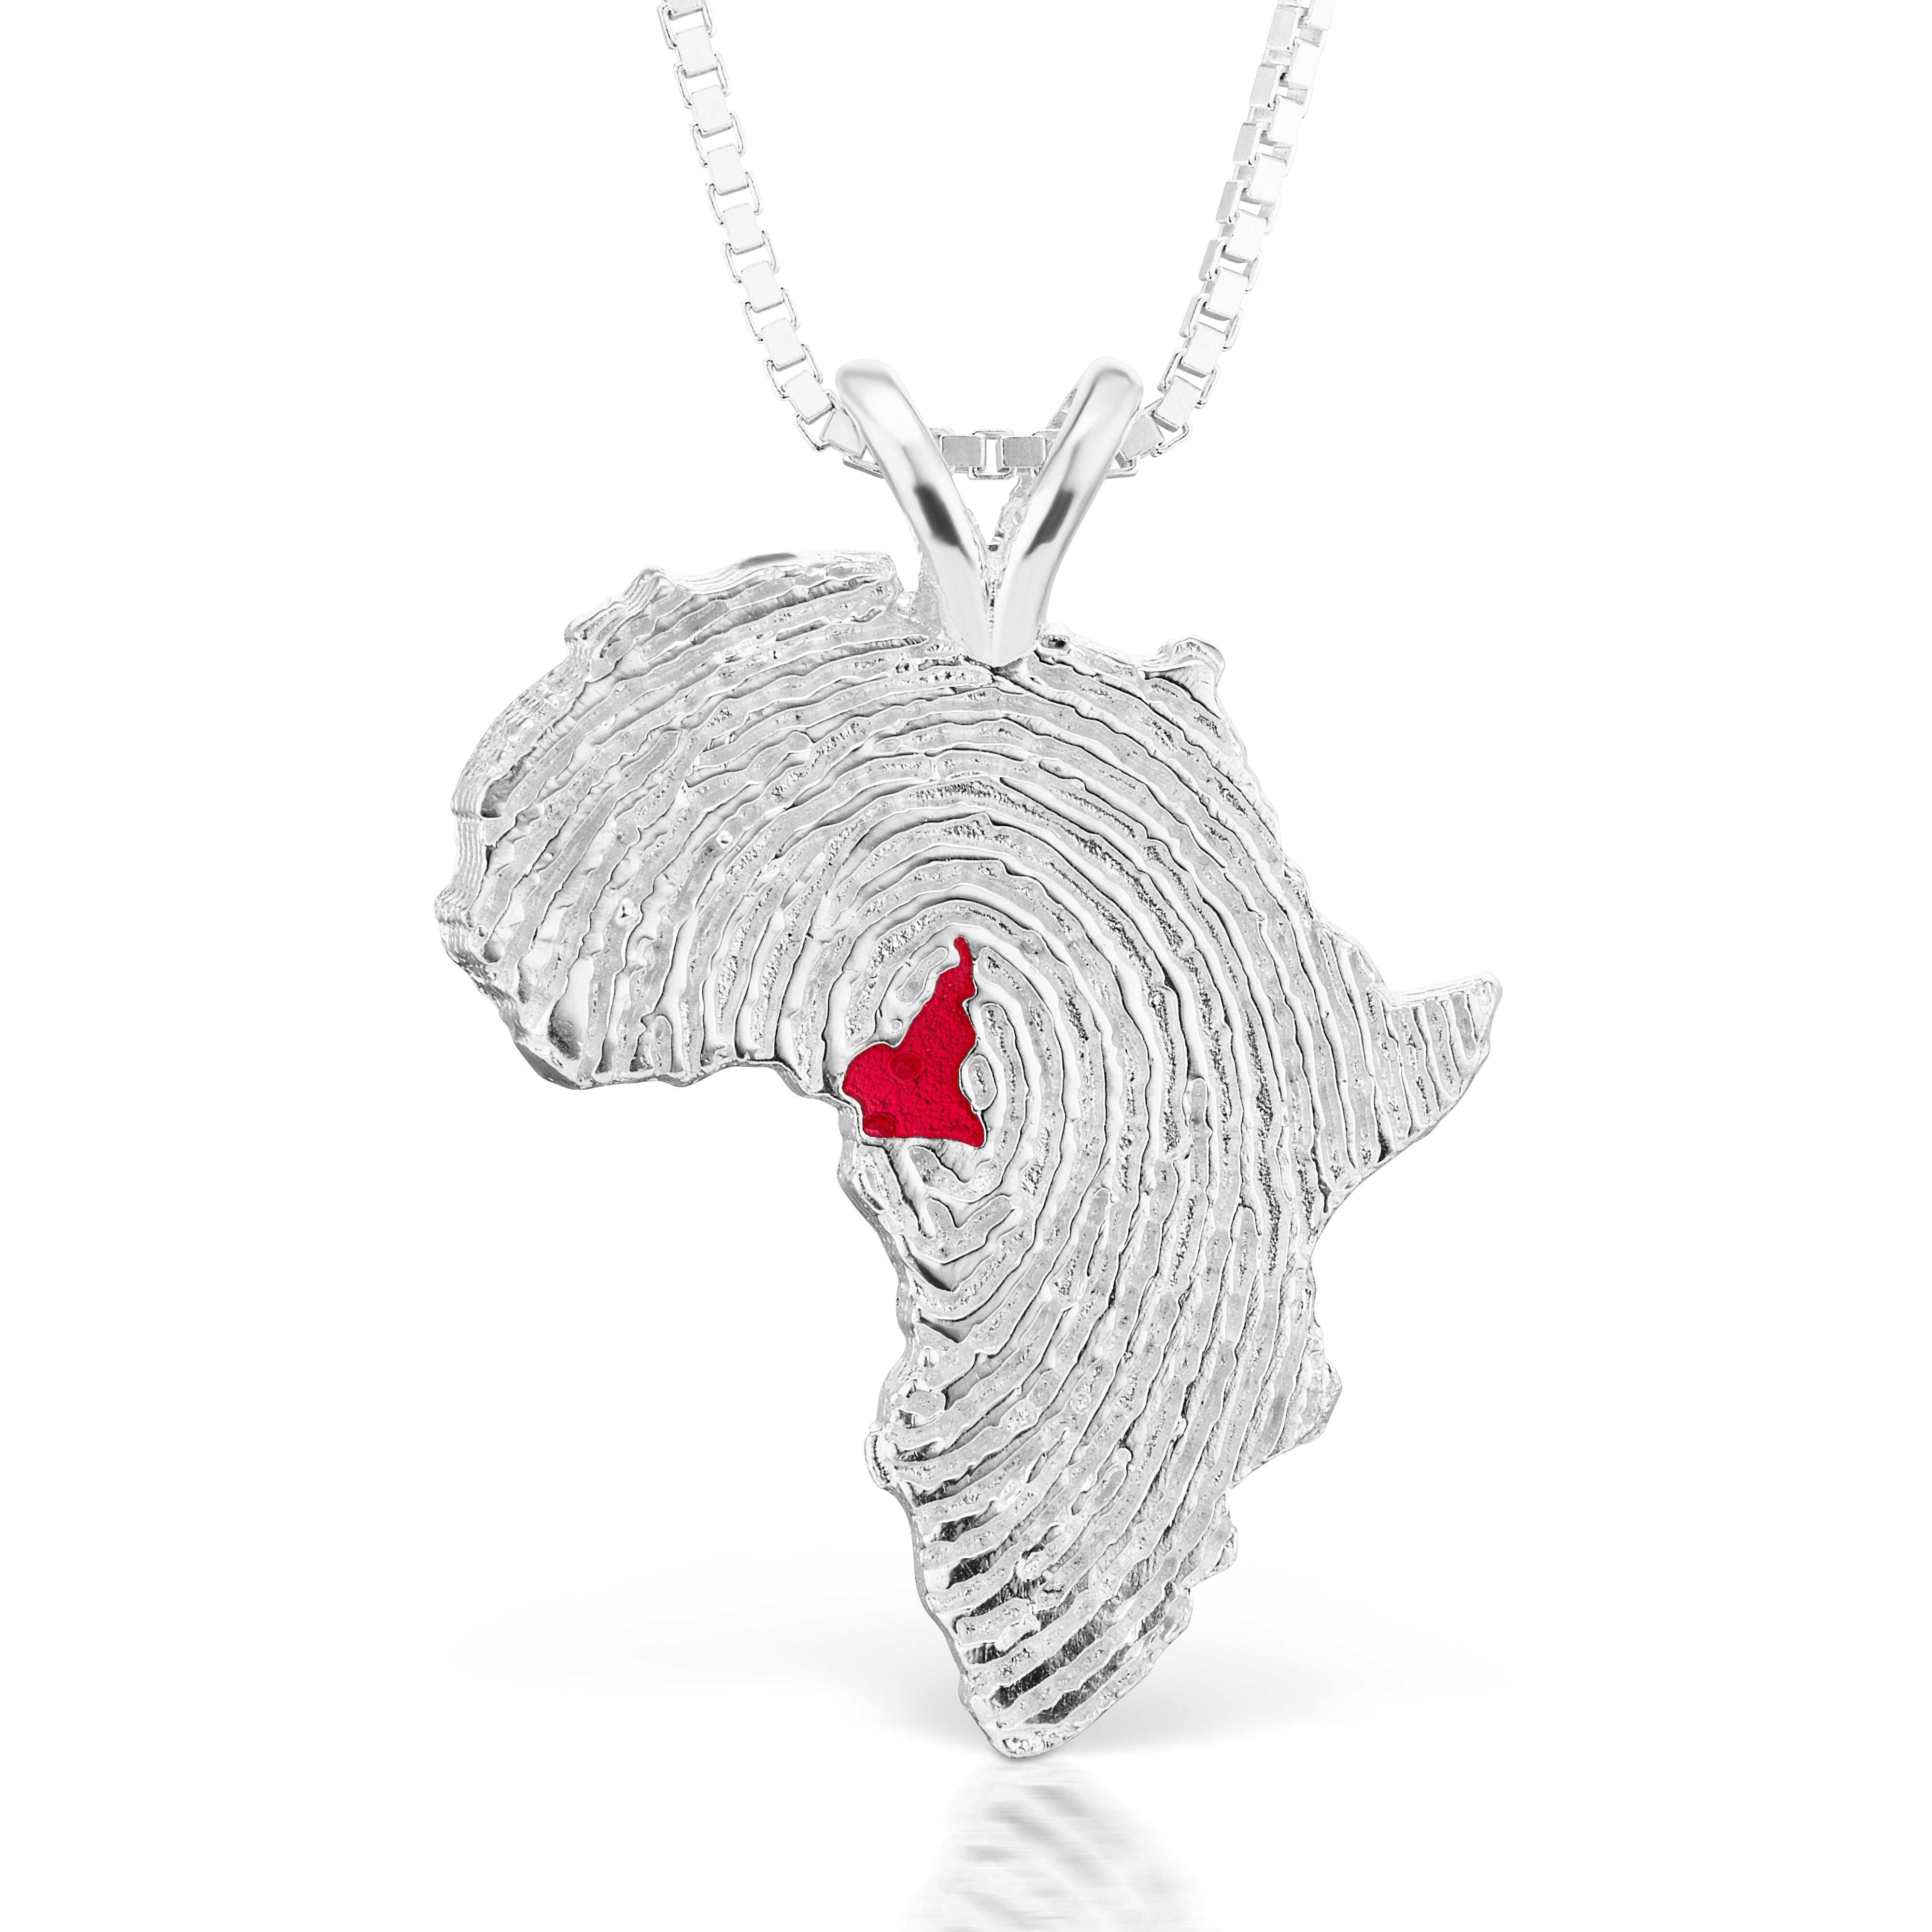 Buy Africa Necklace / African Pendant / Africa Continent Necklace / Map  Africa / Safari Gift Online in India - Etsy